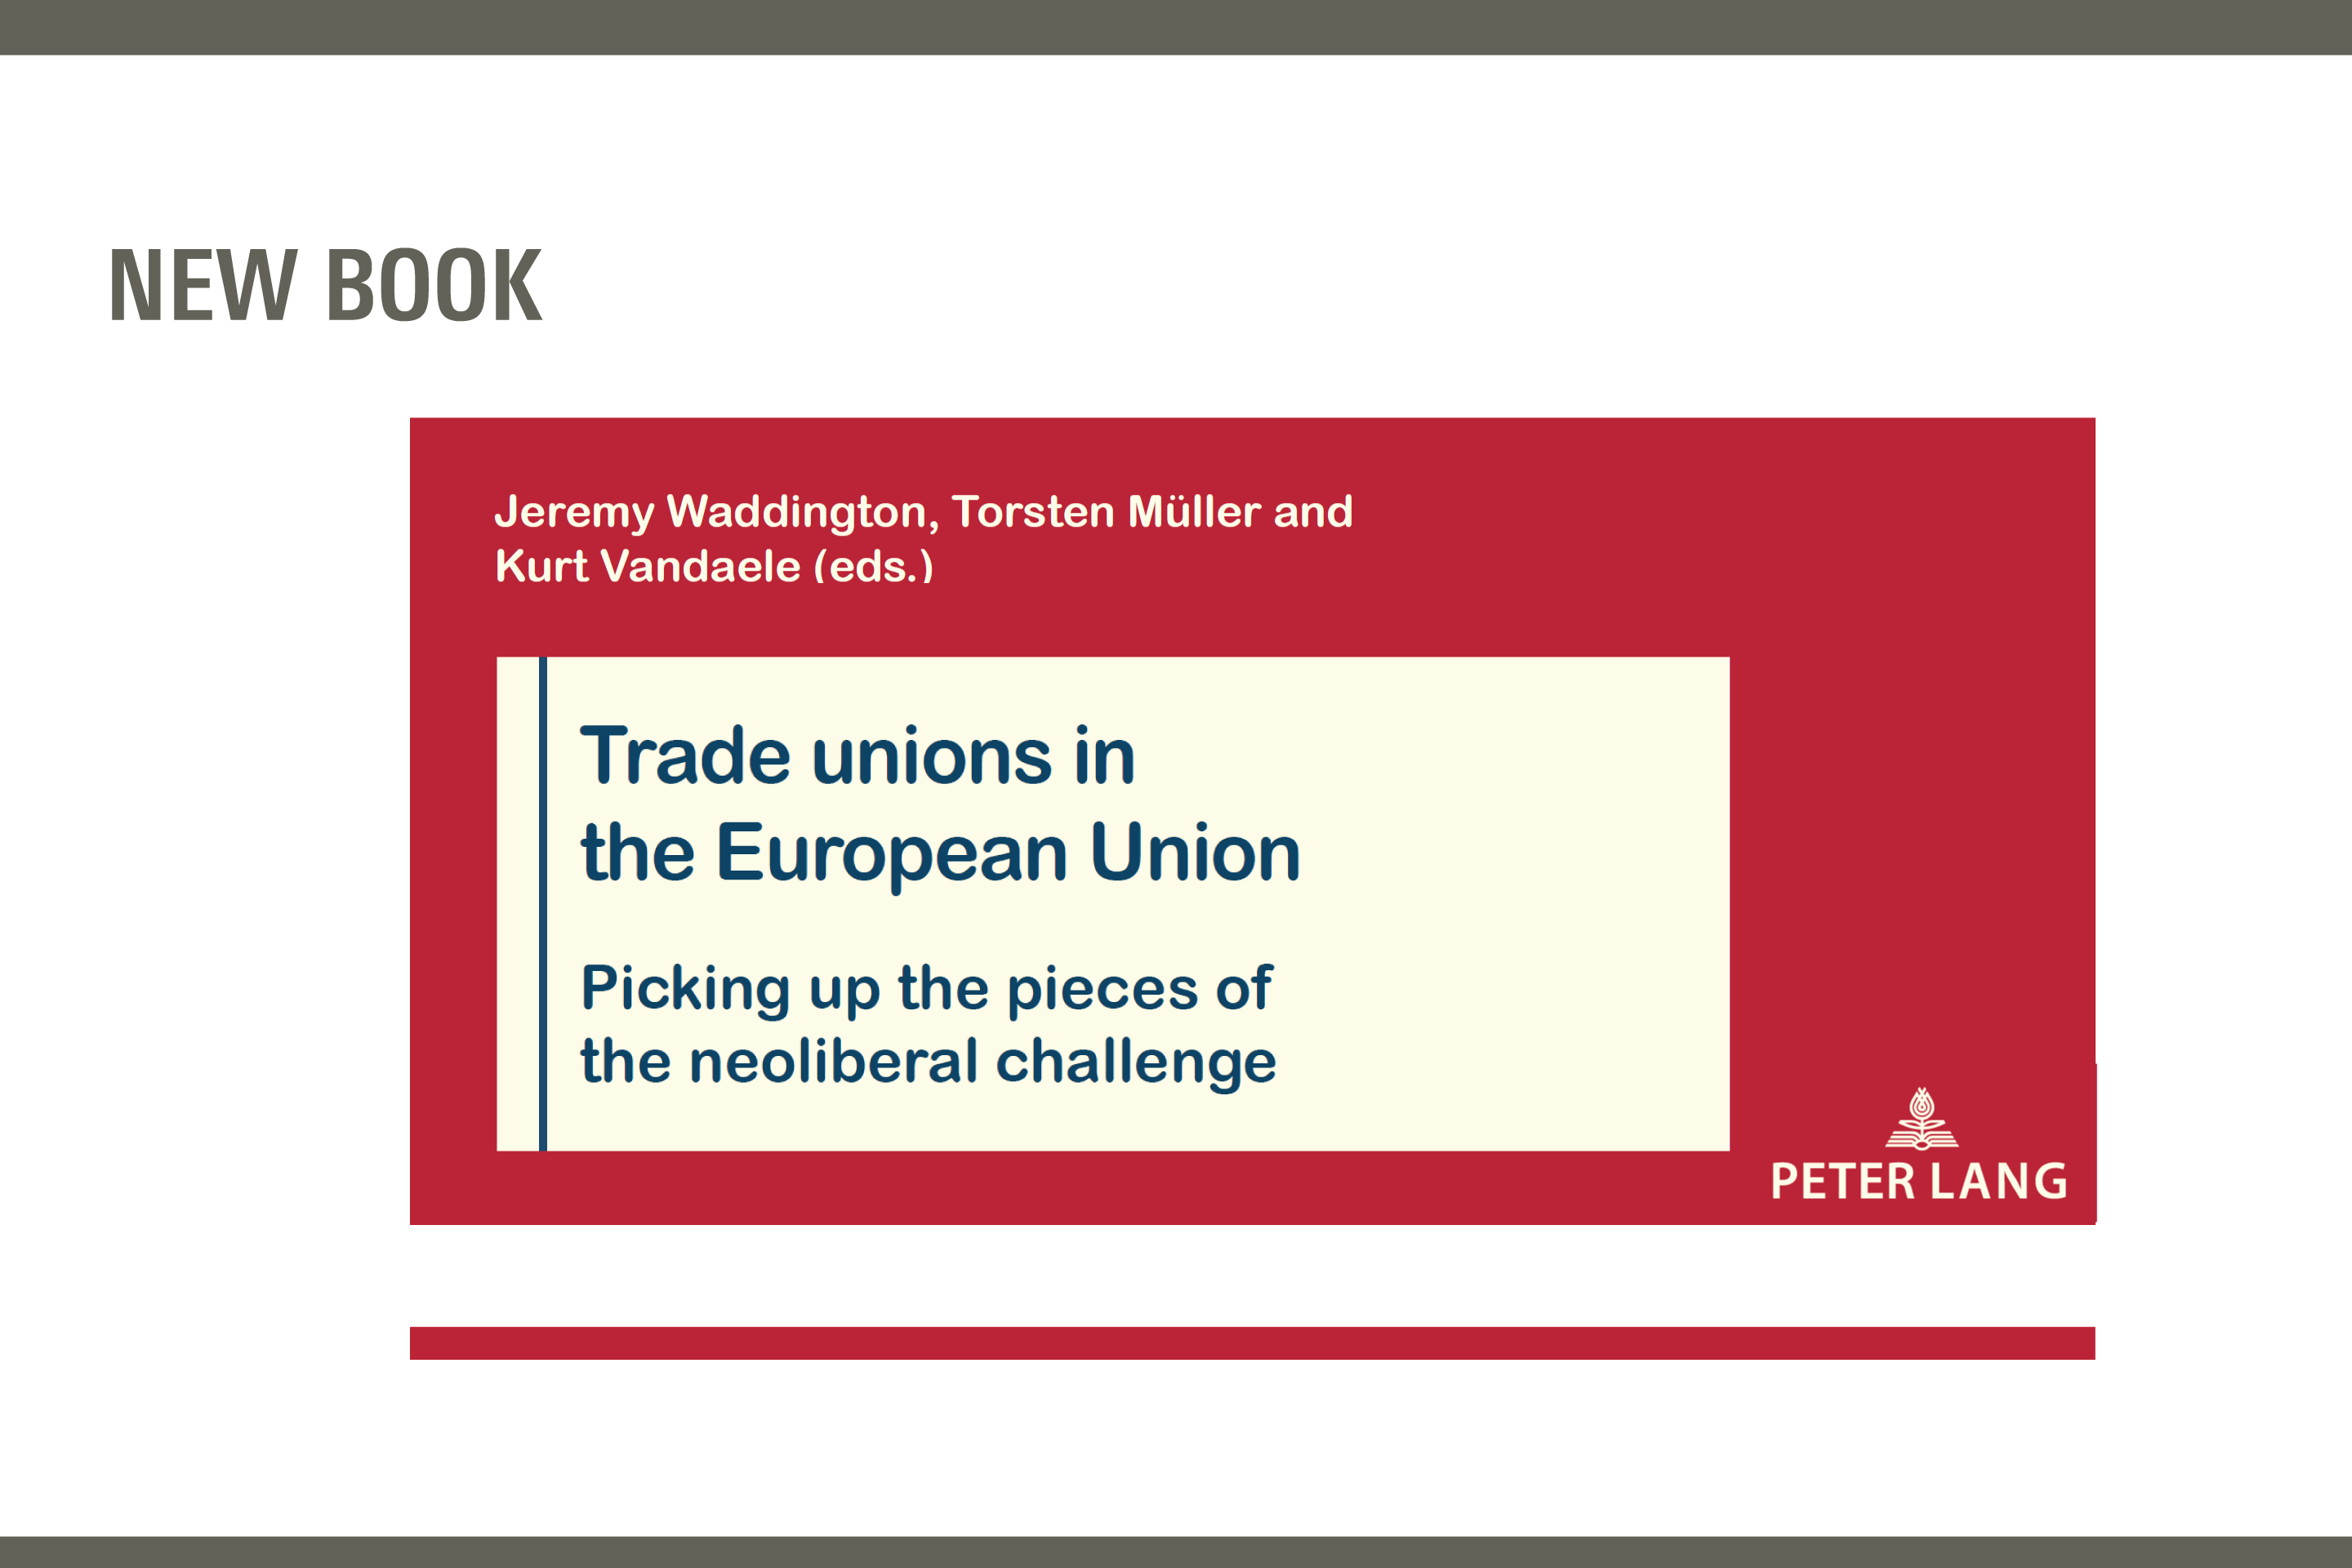 New Book on Trade Unions in the European Unioin